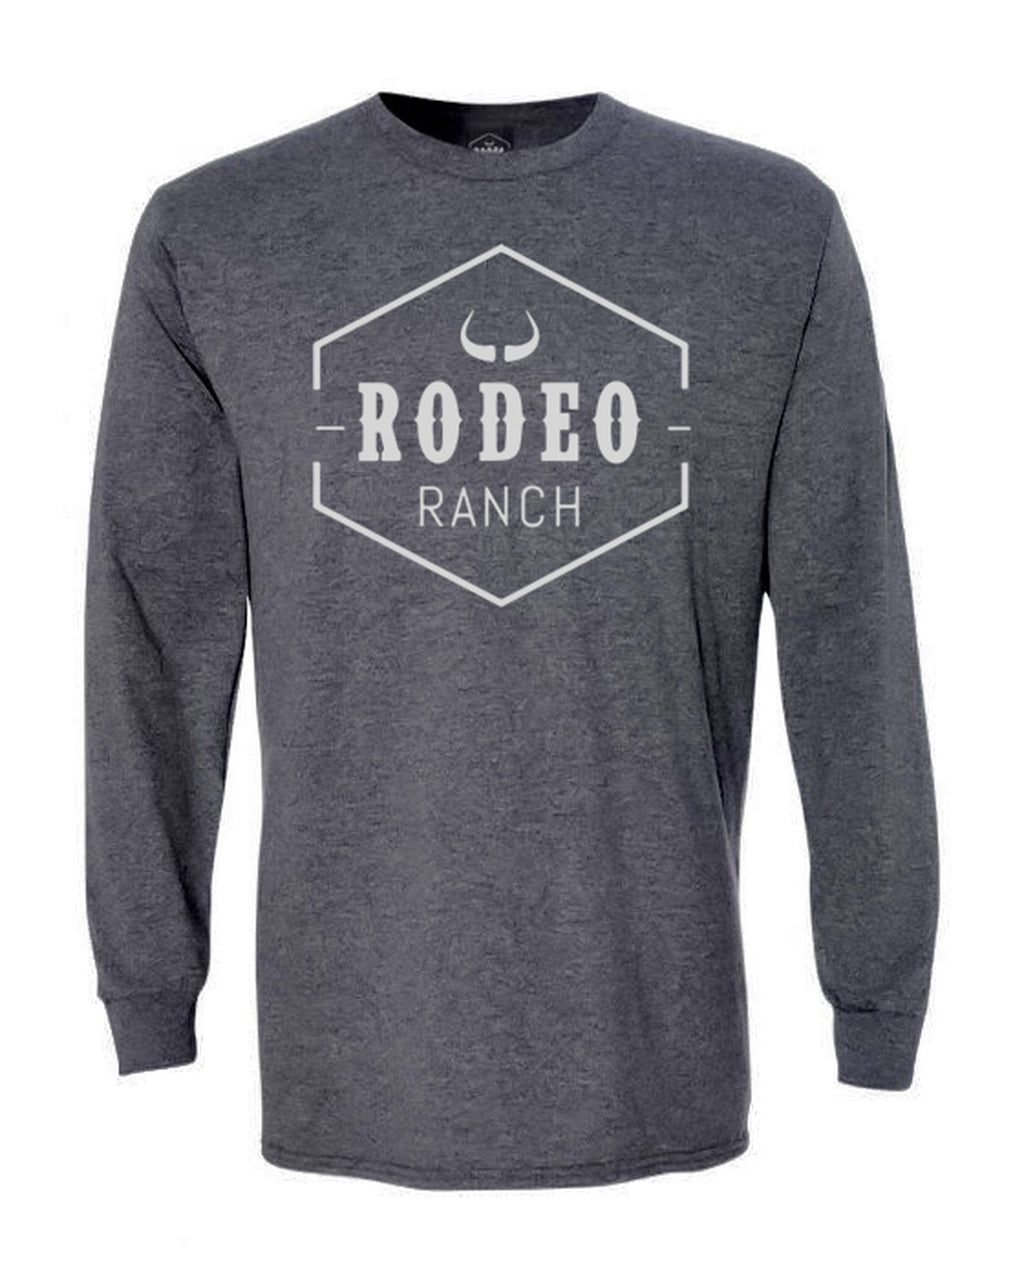 Rodeo Ranch Classic Logo Long Sleeve Shirt - Heather Charcoal and White